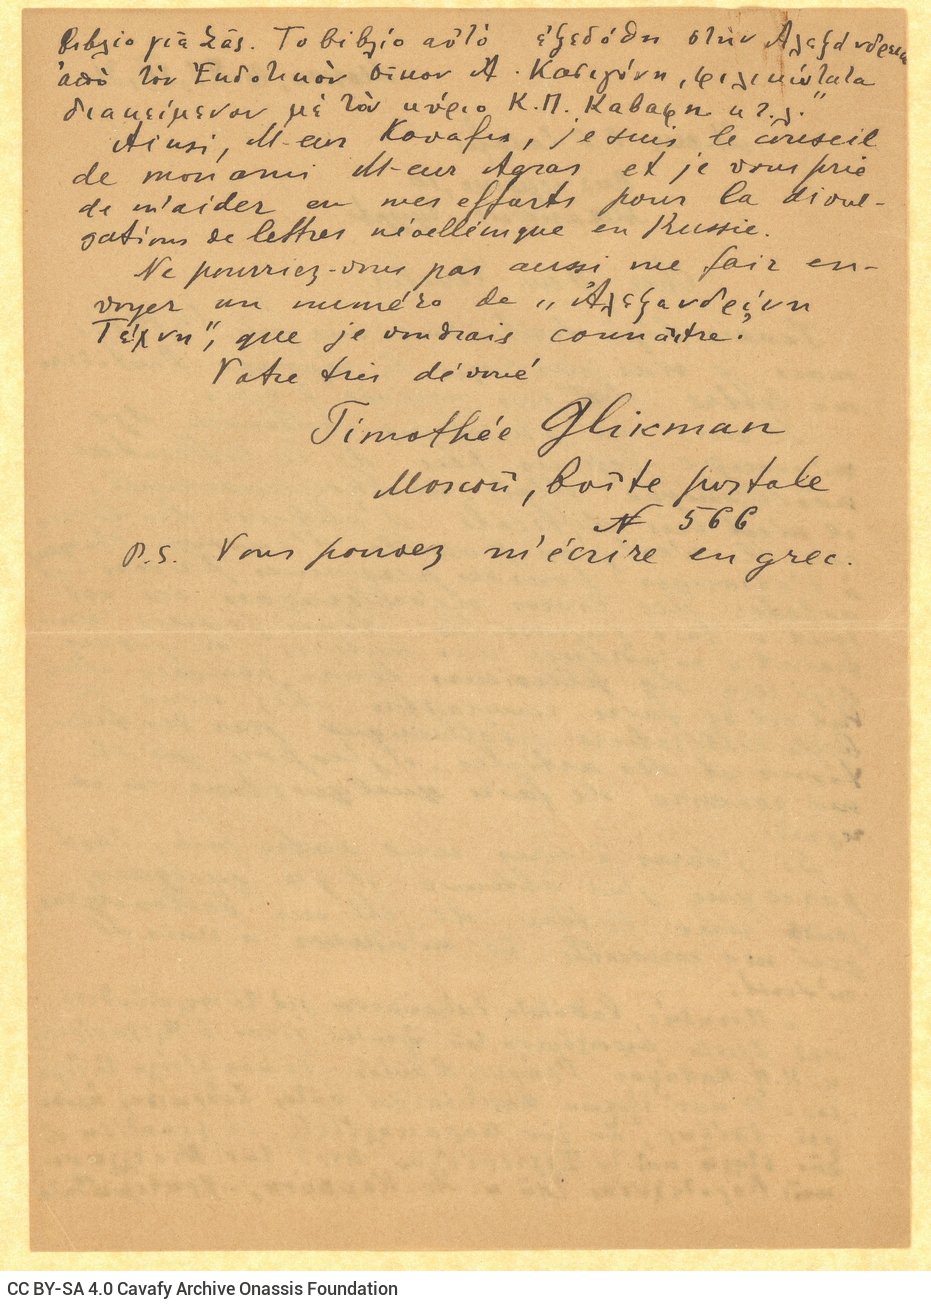 Handwritten letter by Timothée Glückmann to Cavafy on both sides of a sheet. The author asks for Cavafy's assistance in ord